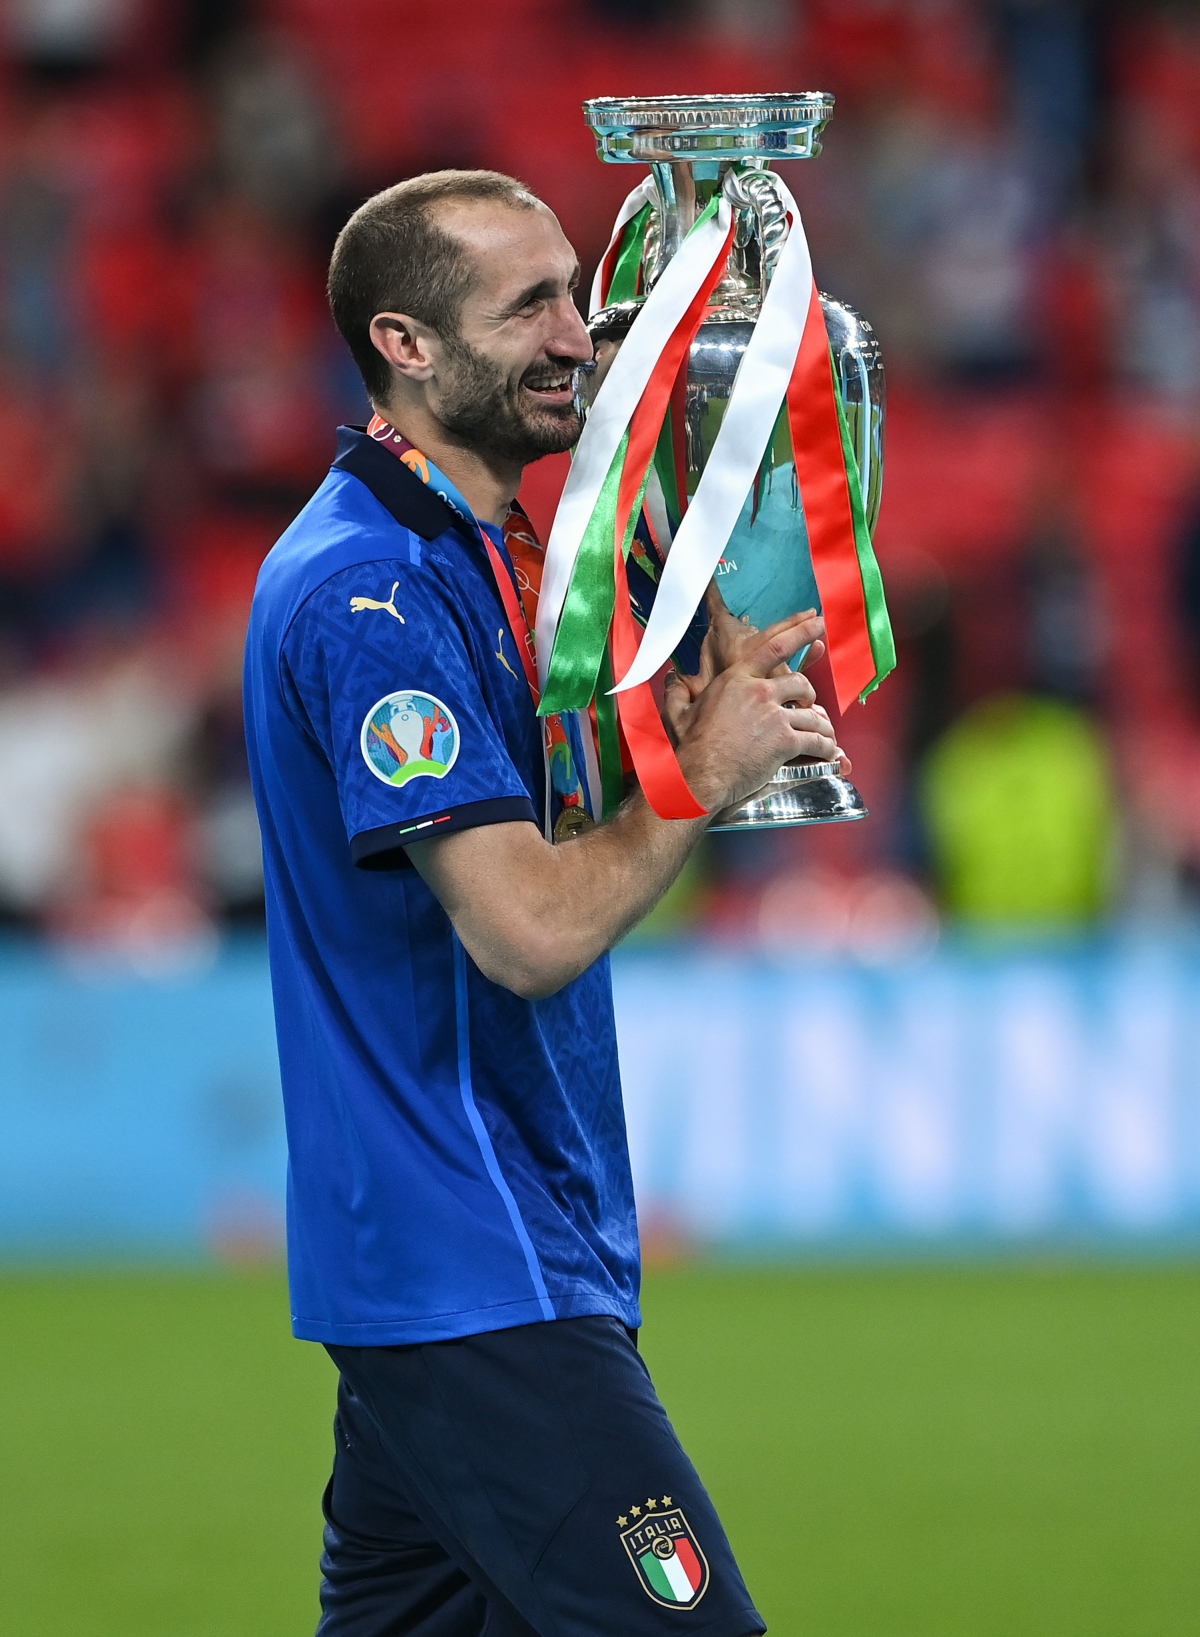 can canh Dt italia nang cup, an mung chuc vo dich euro 2021 hinh anh 5